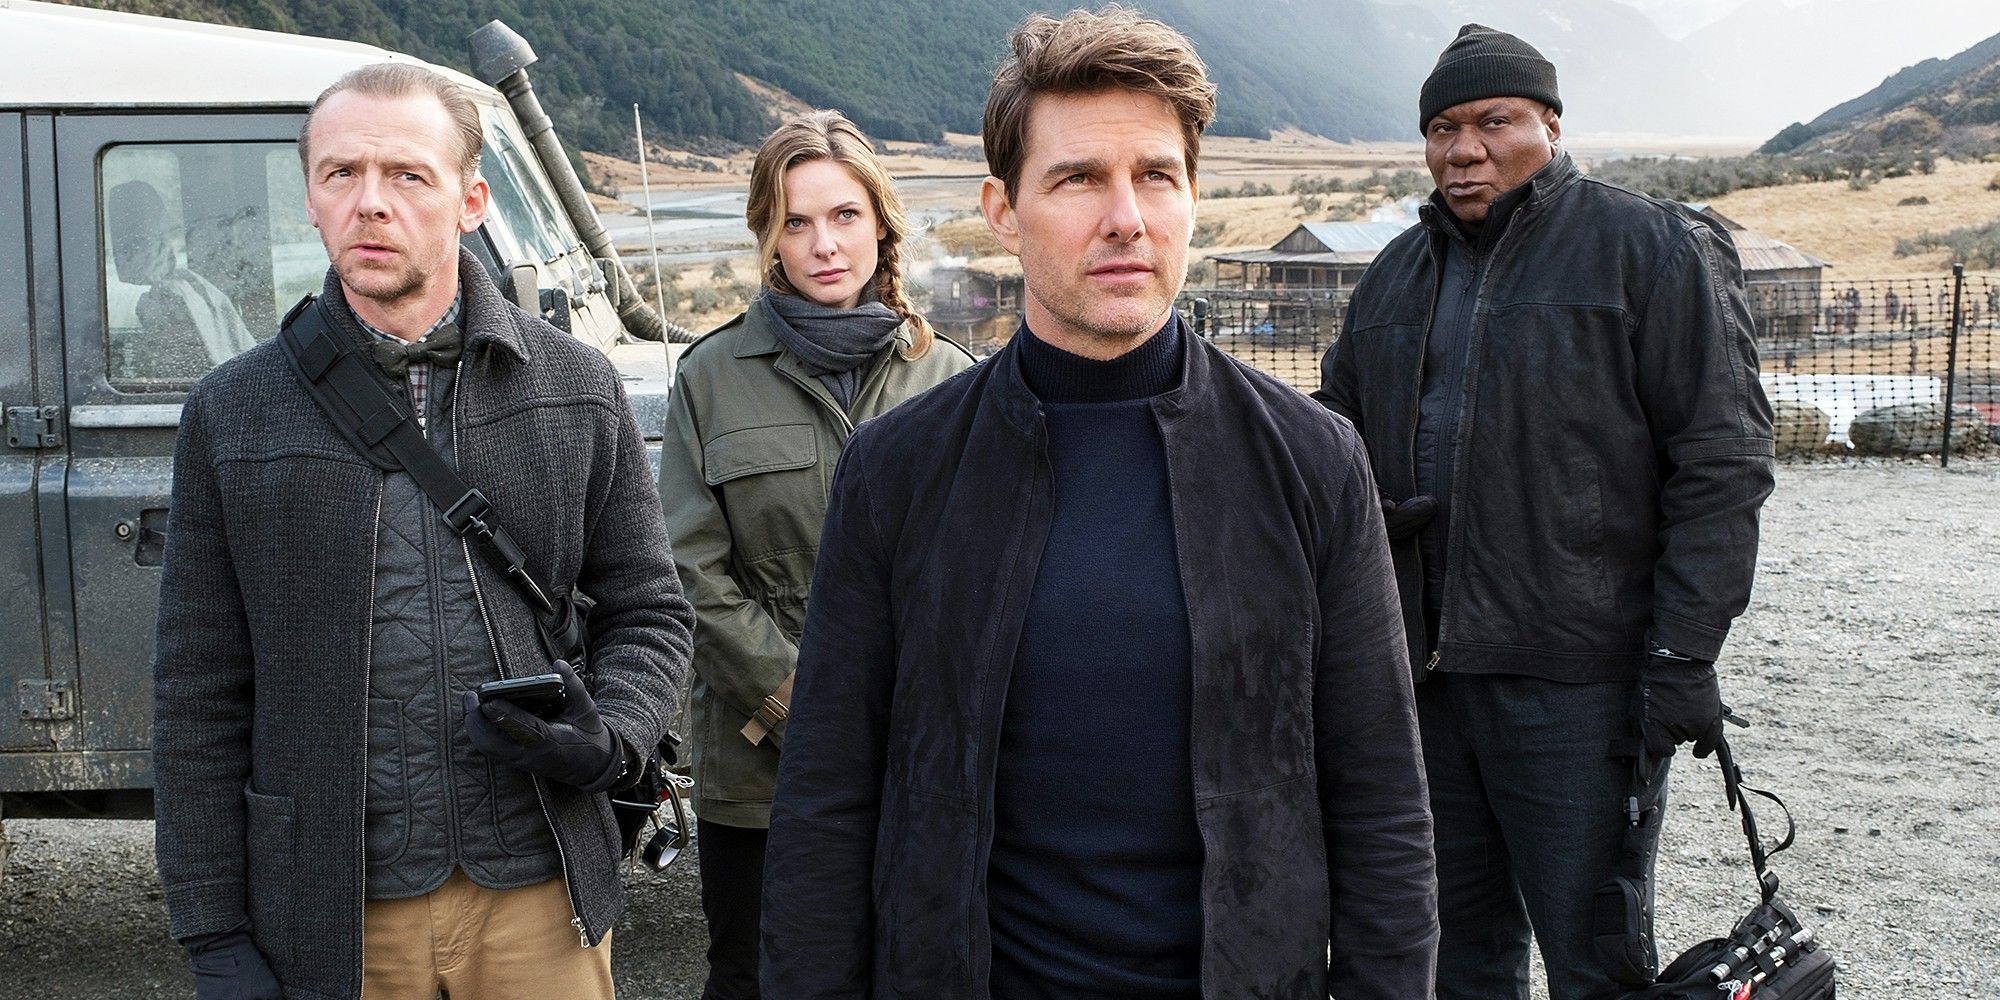 Mission Impossible - Fallout Cast